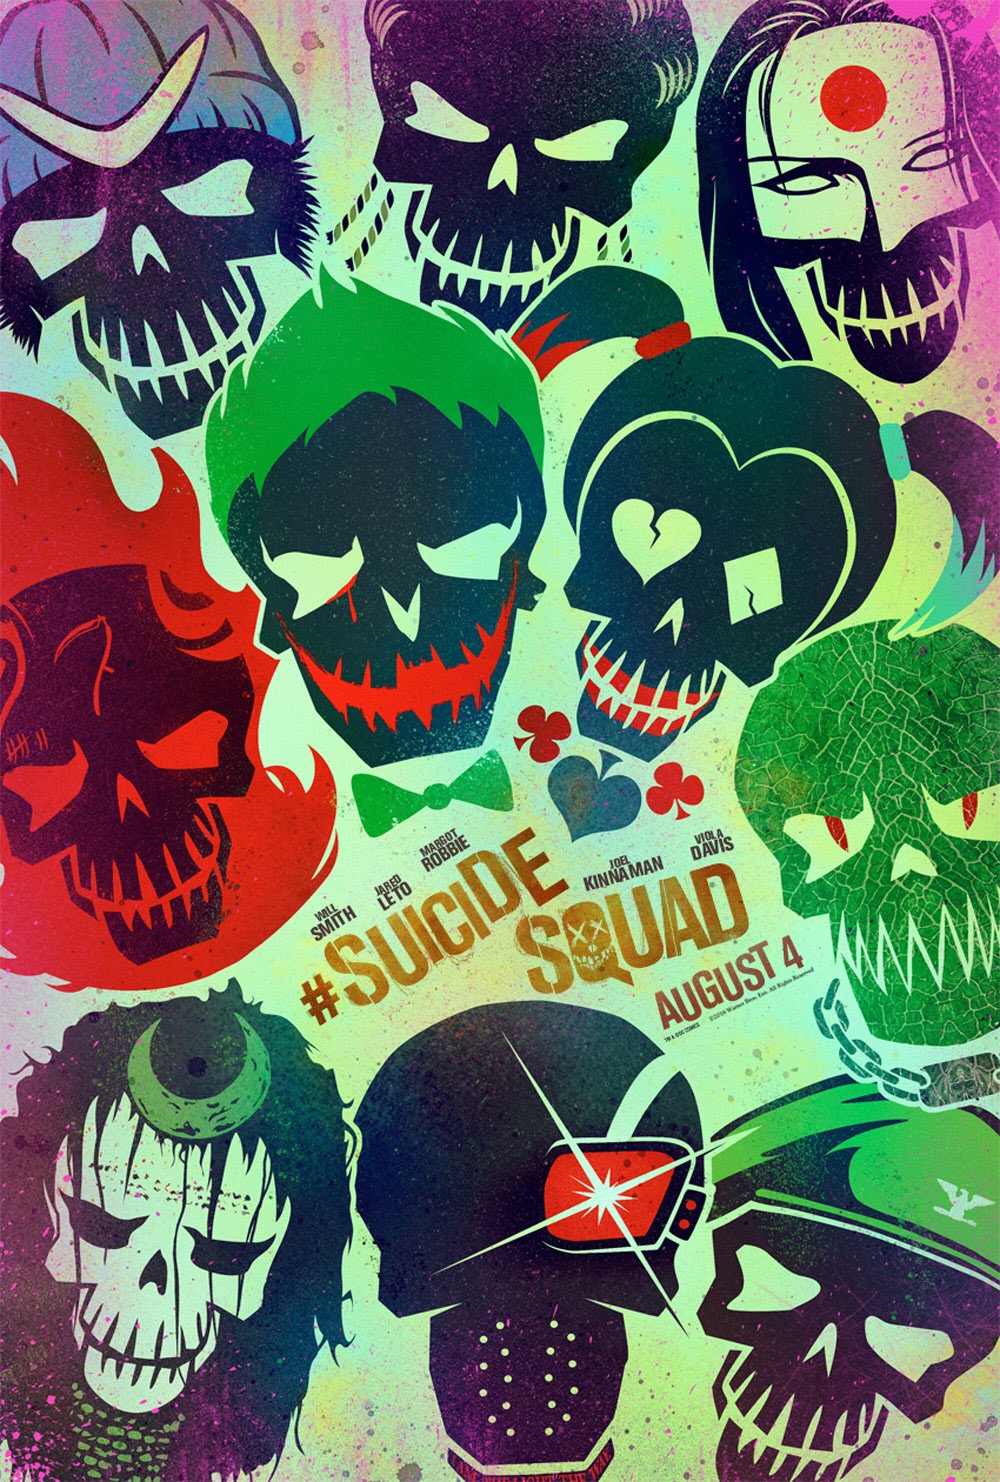 Suicide Squad  Official Movie Site  Available on Digital HD 11 